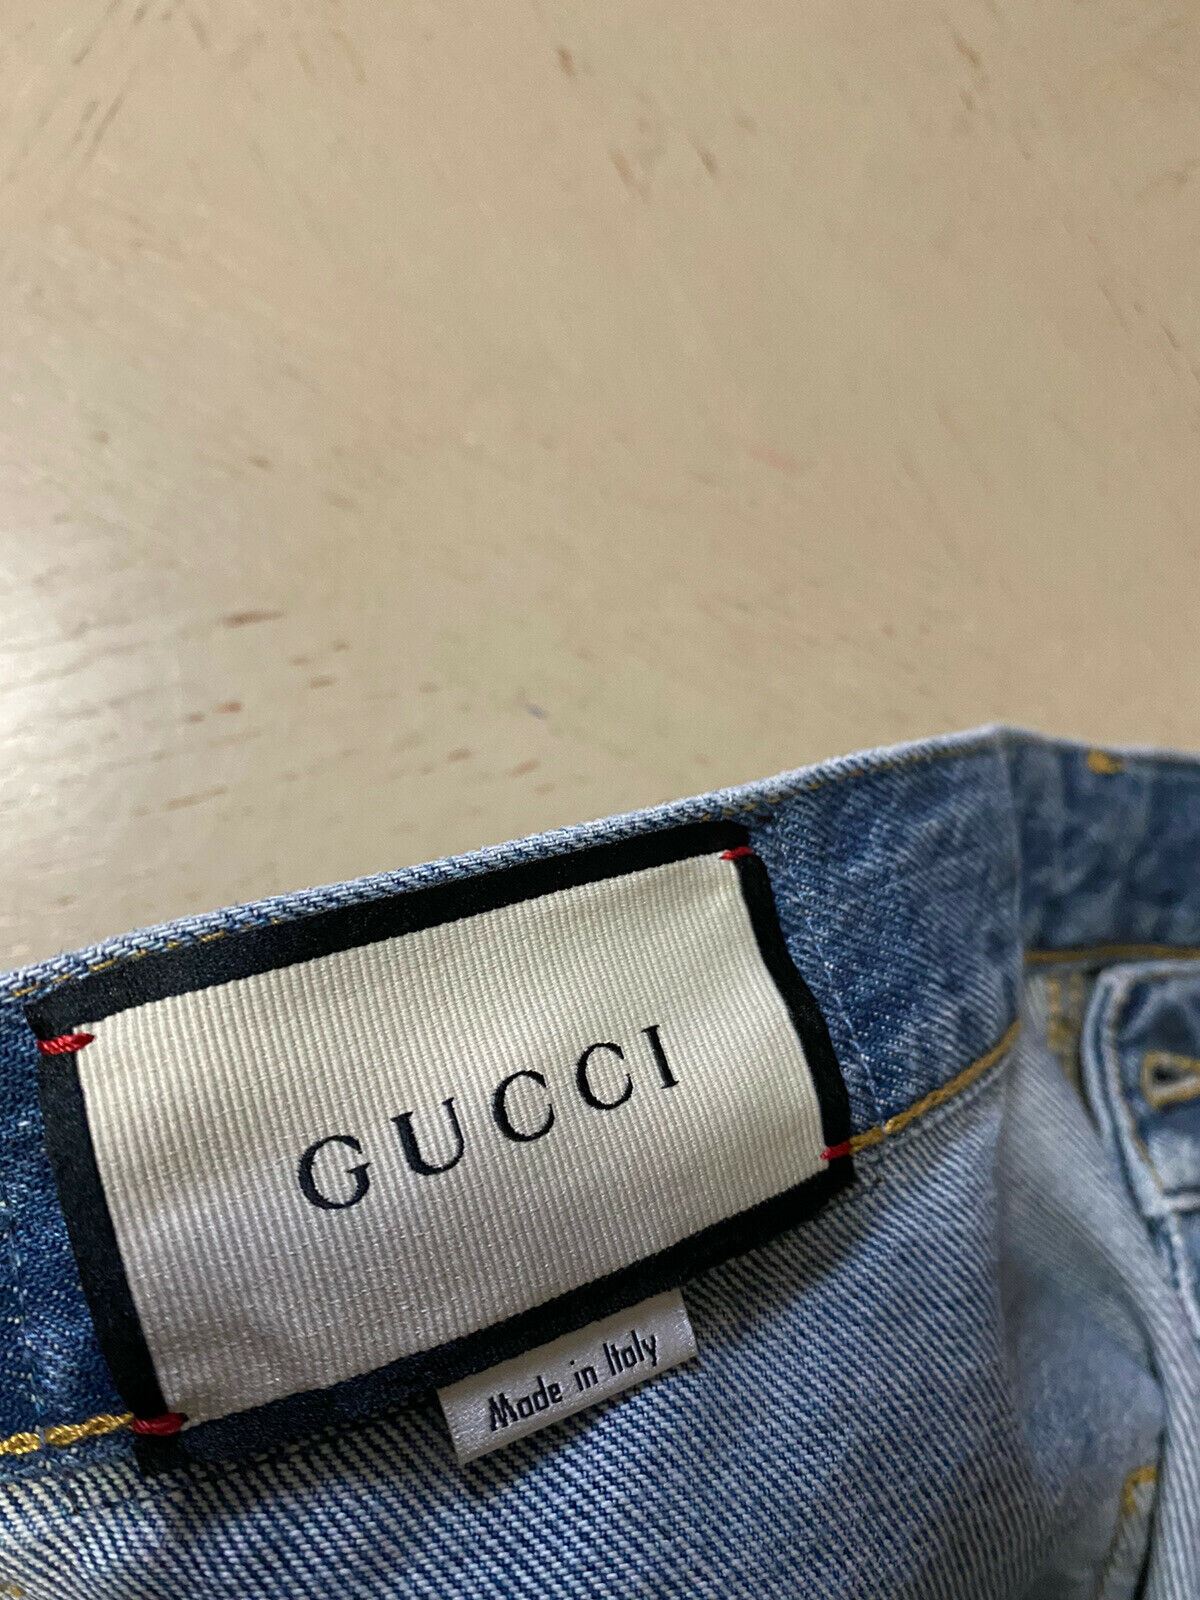 NWT $1500 Gucci Mens Short Jeans Pants Blue Size 34 taly